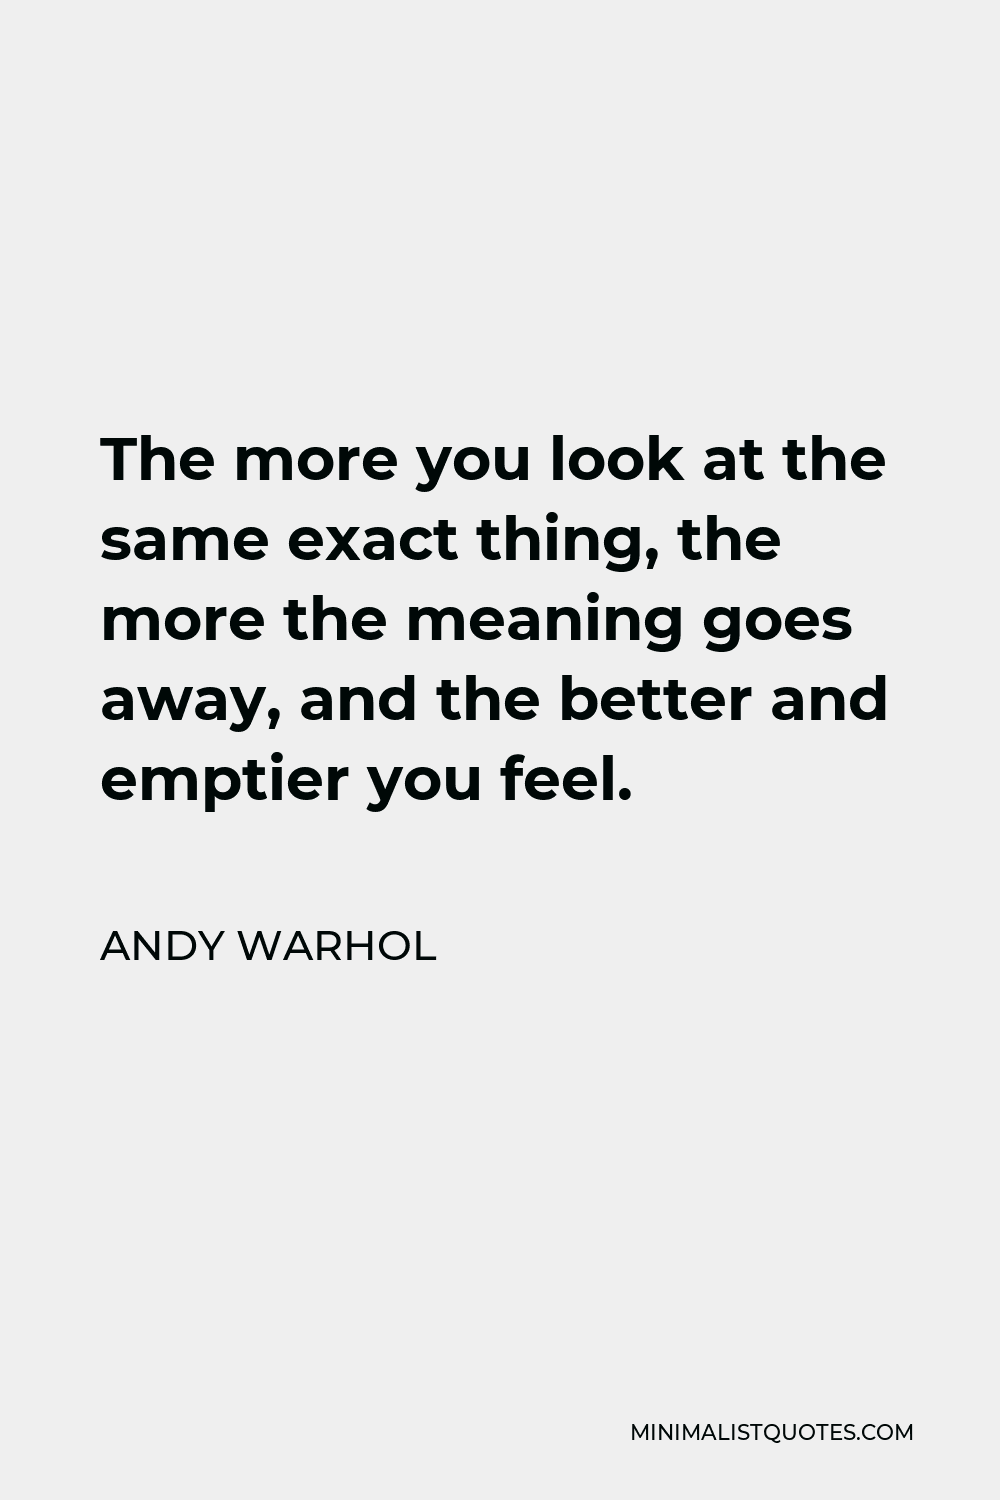 Andy Warhol Quote - The more you look at the same exact thing, the more the meaning goes away, and the better and emptier you feel.